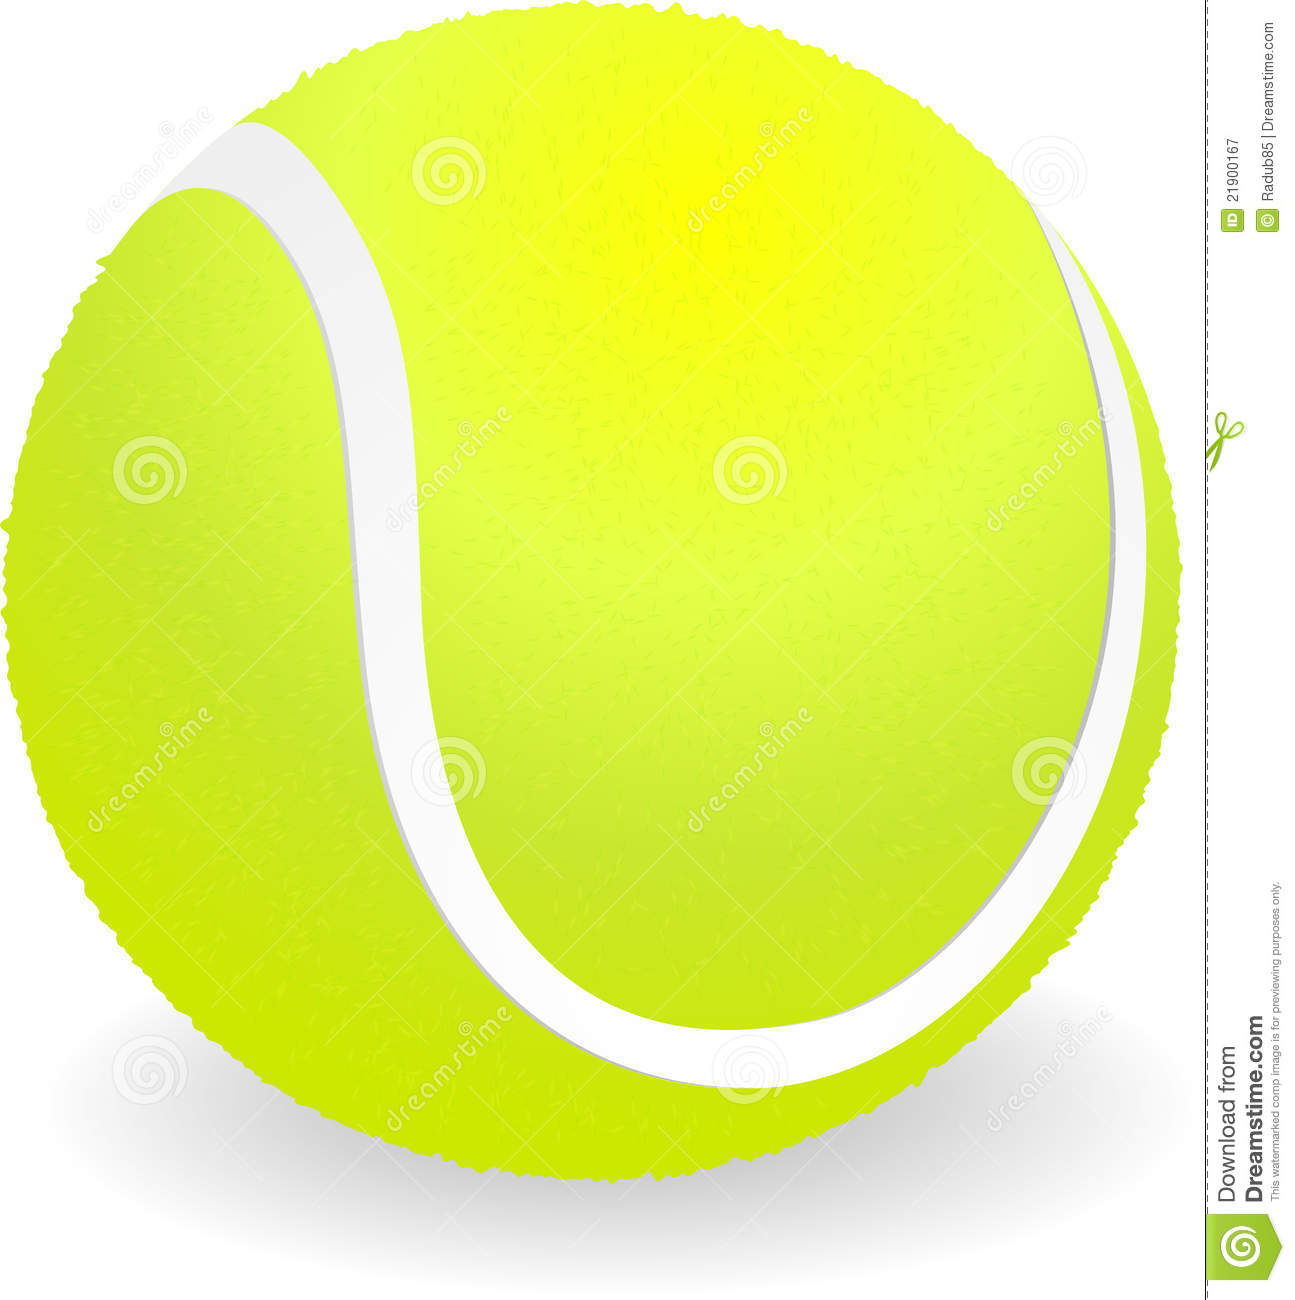 Tennis Ball Royalty Free Stock Photography   Image  21900167